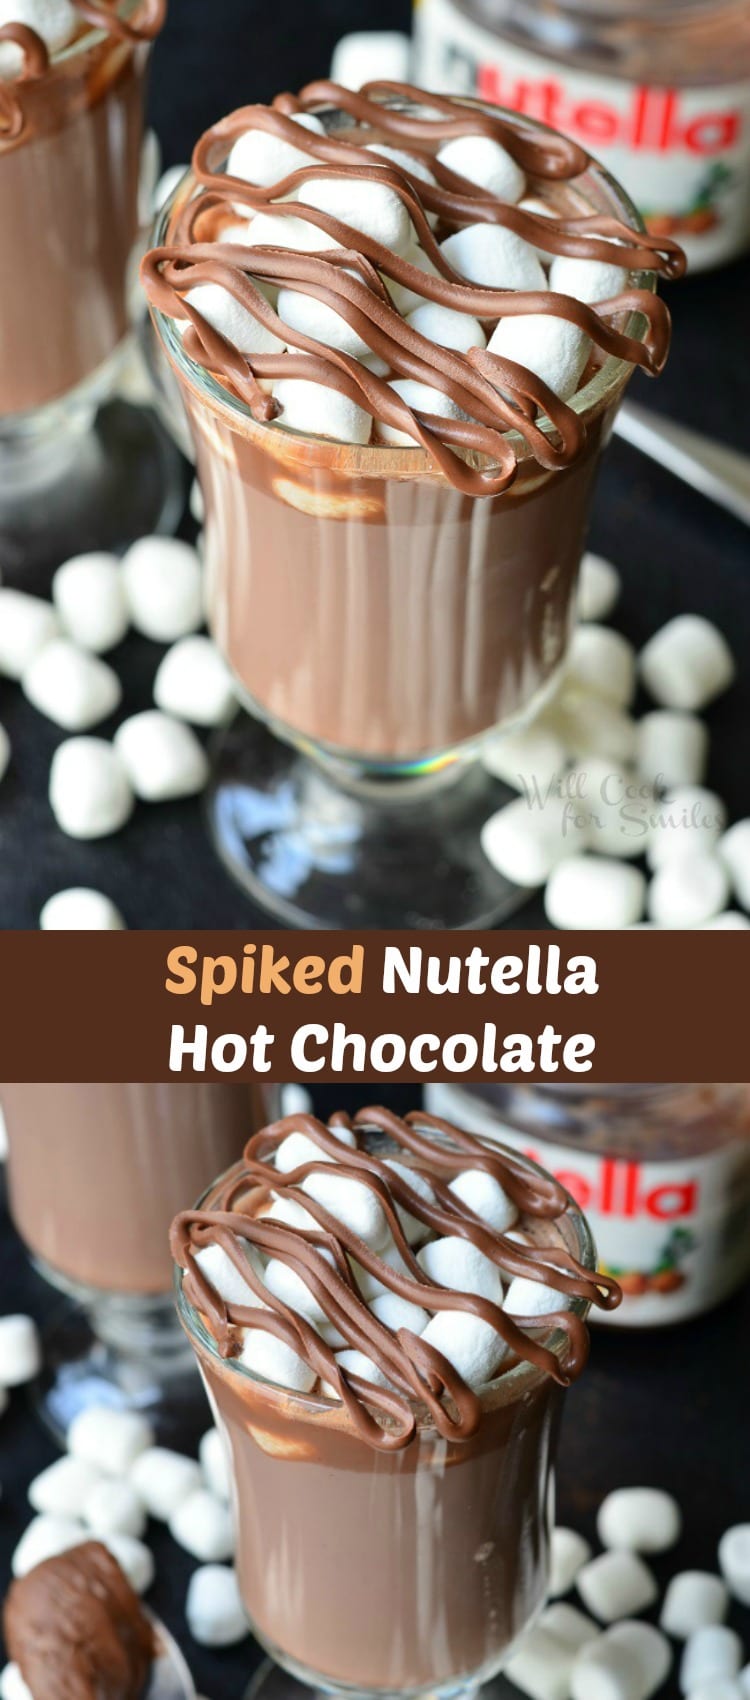 Spiked Nutella Hot Chocolate. Amazing Hot Chocolate made with Nutella, spiked with hazelnut and coffee liqueurs, topped with marshmallows and more Nutella! #hotcocoa #hotchocolate #nutella #cocktail #holidaydrink #chocolate